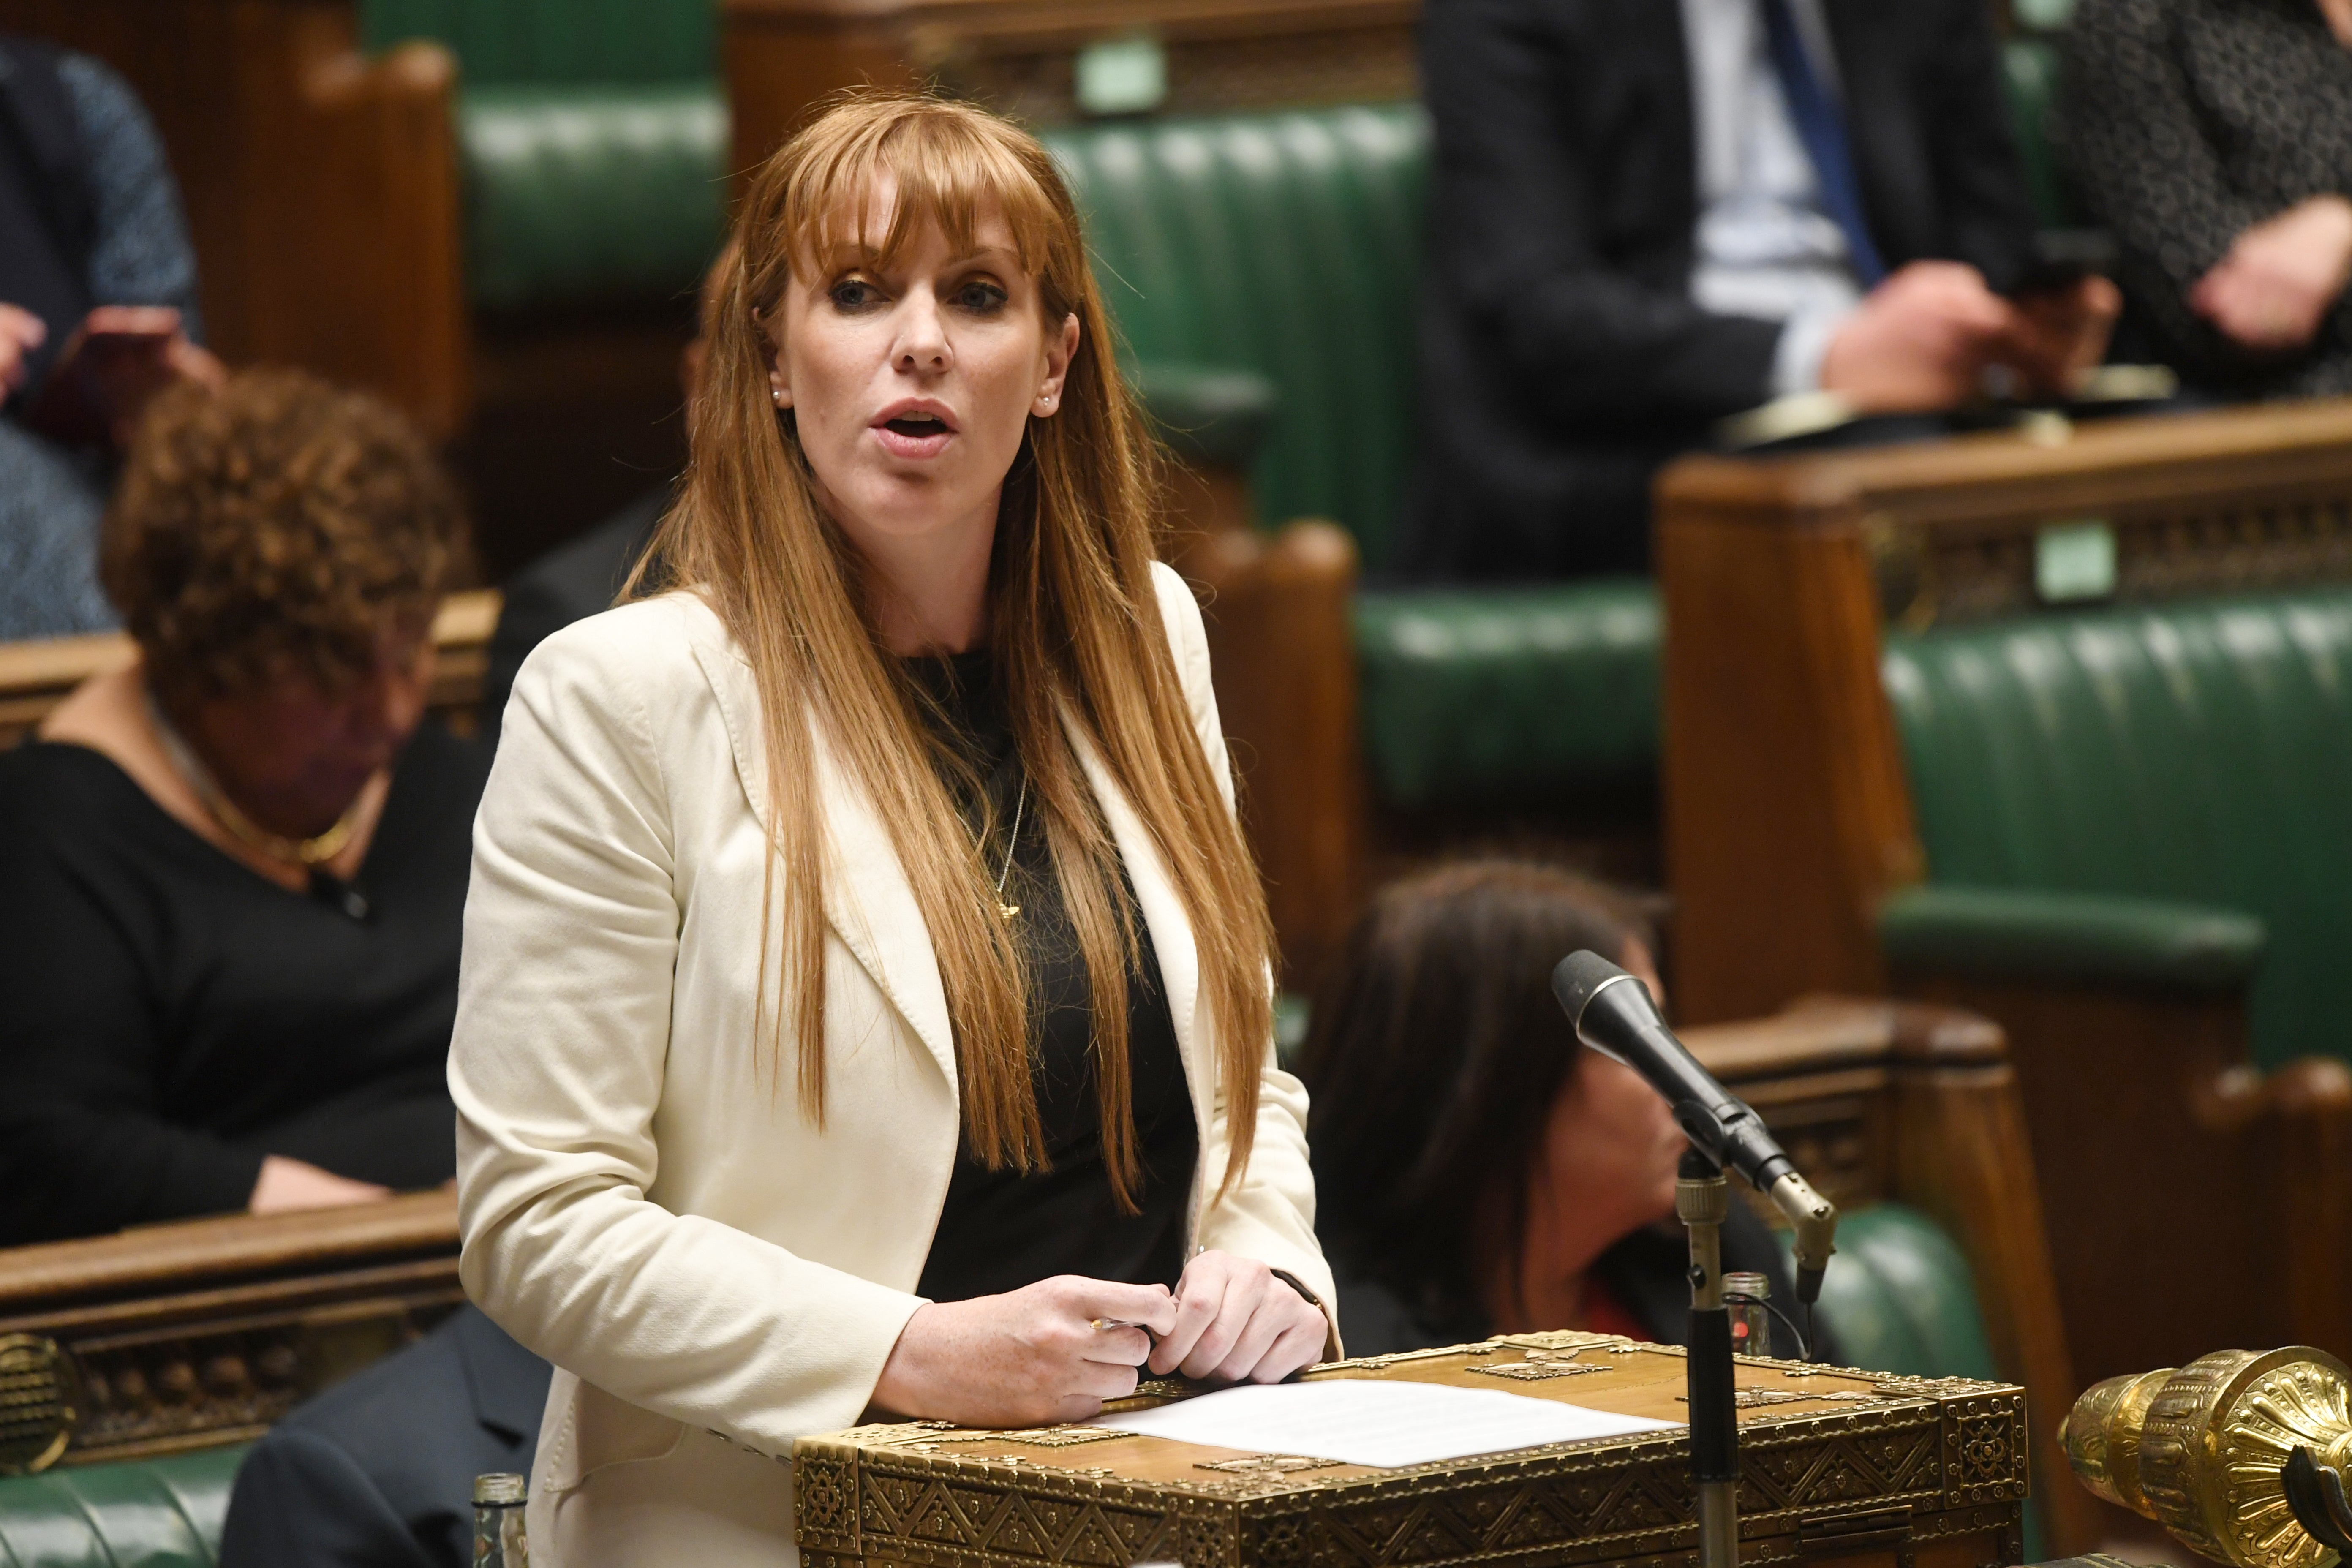 Labour’s Angela Rayner was accused of distracting the Prime Minister (UK Parliament/Jessica Taylor/PA)